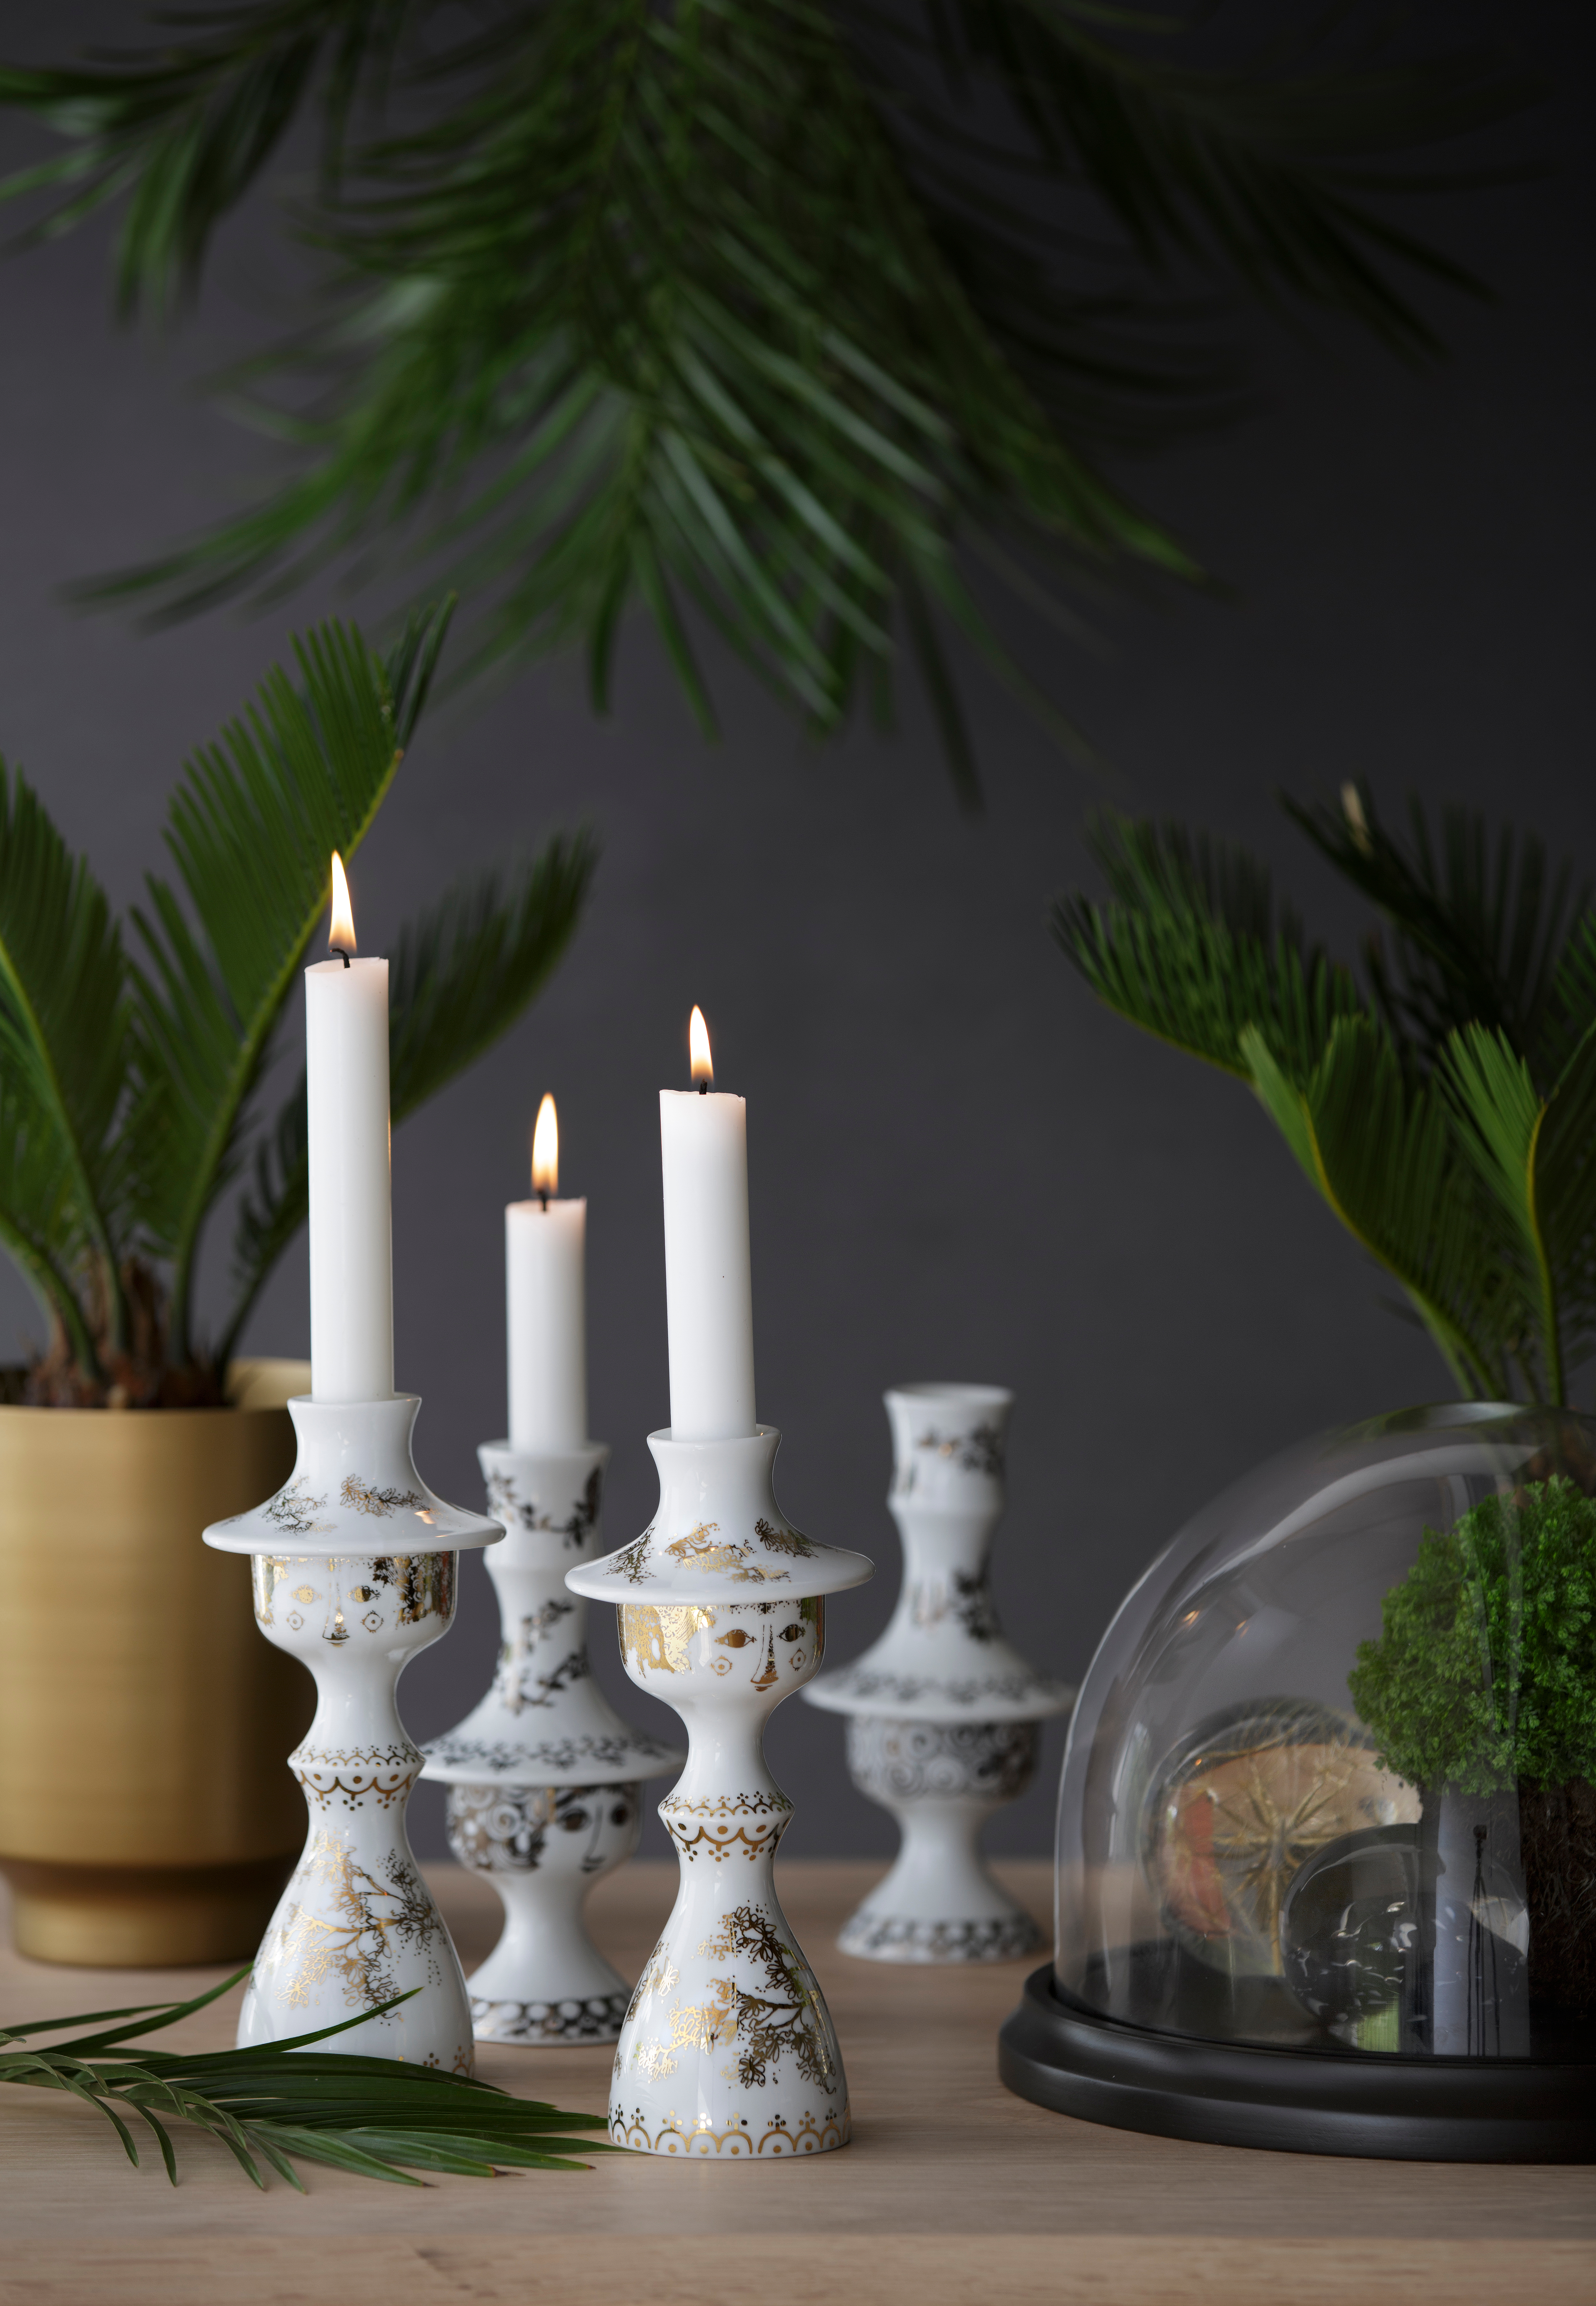 Candleholders and candles from Bjørn Wiinblad. Buy the candlestick at Rosendahl.com